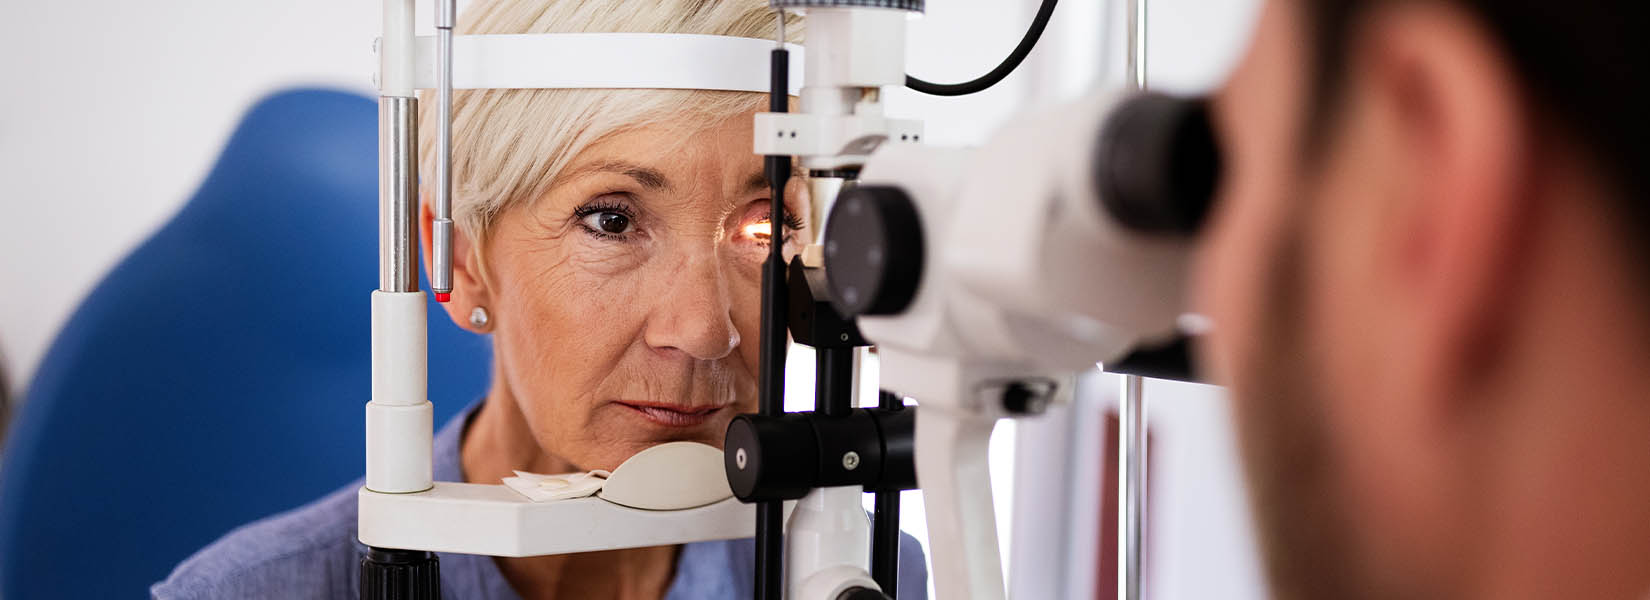 Preserve Your Vision With ABBA Eye Care - Pagosa Springs